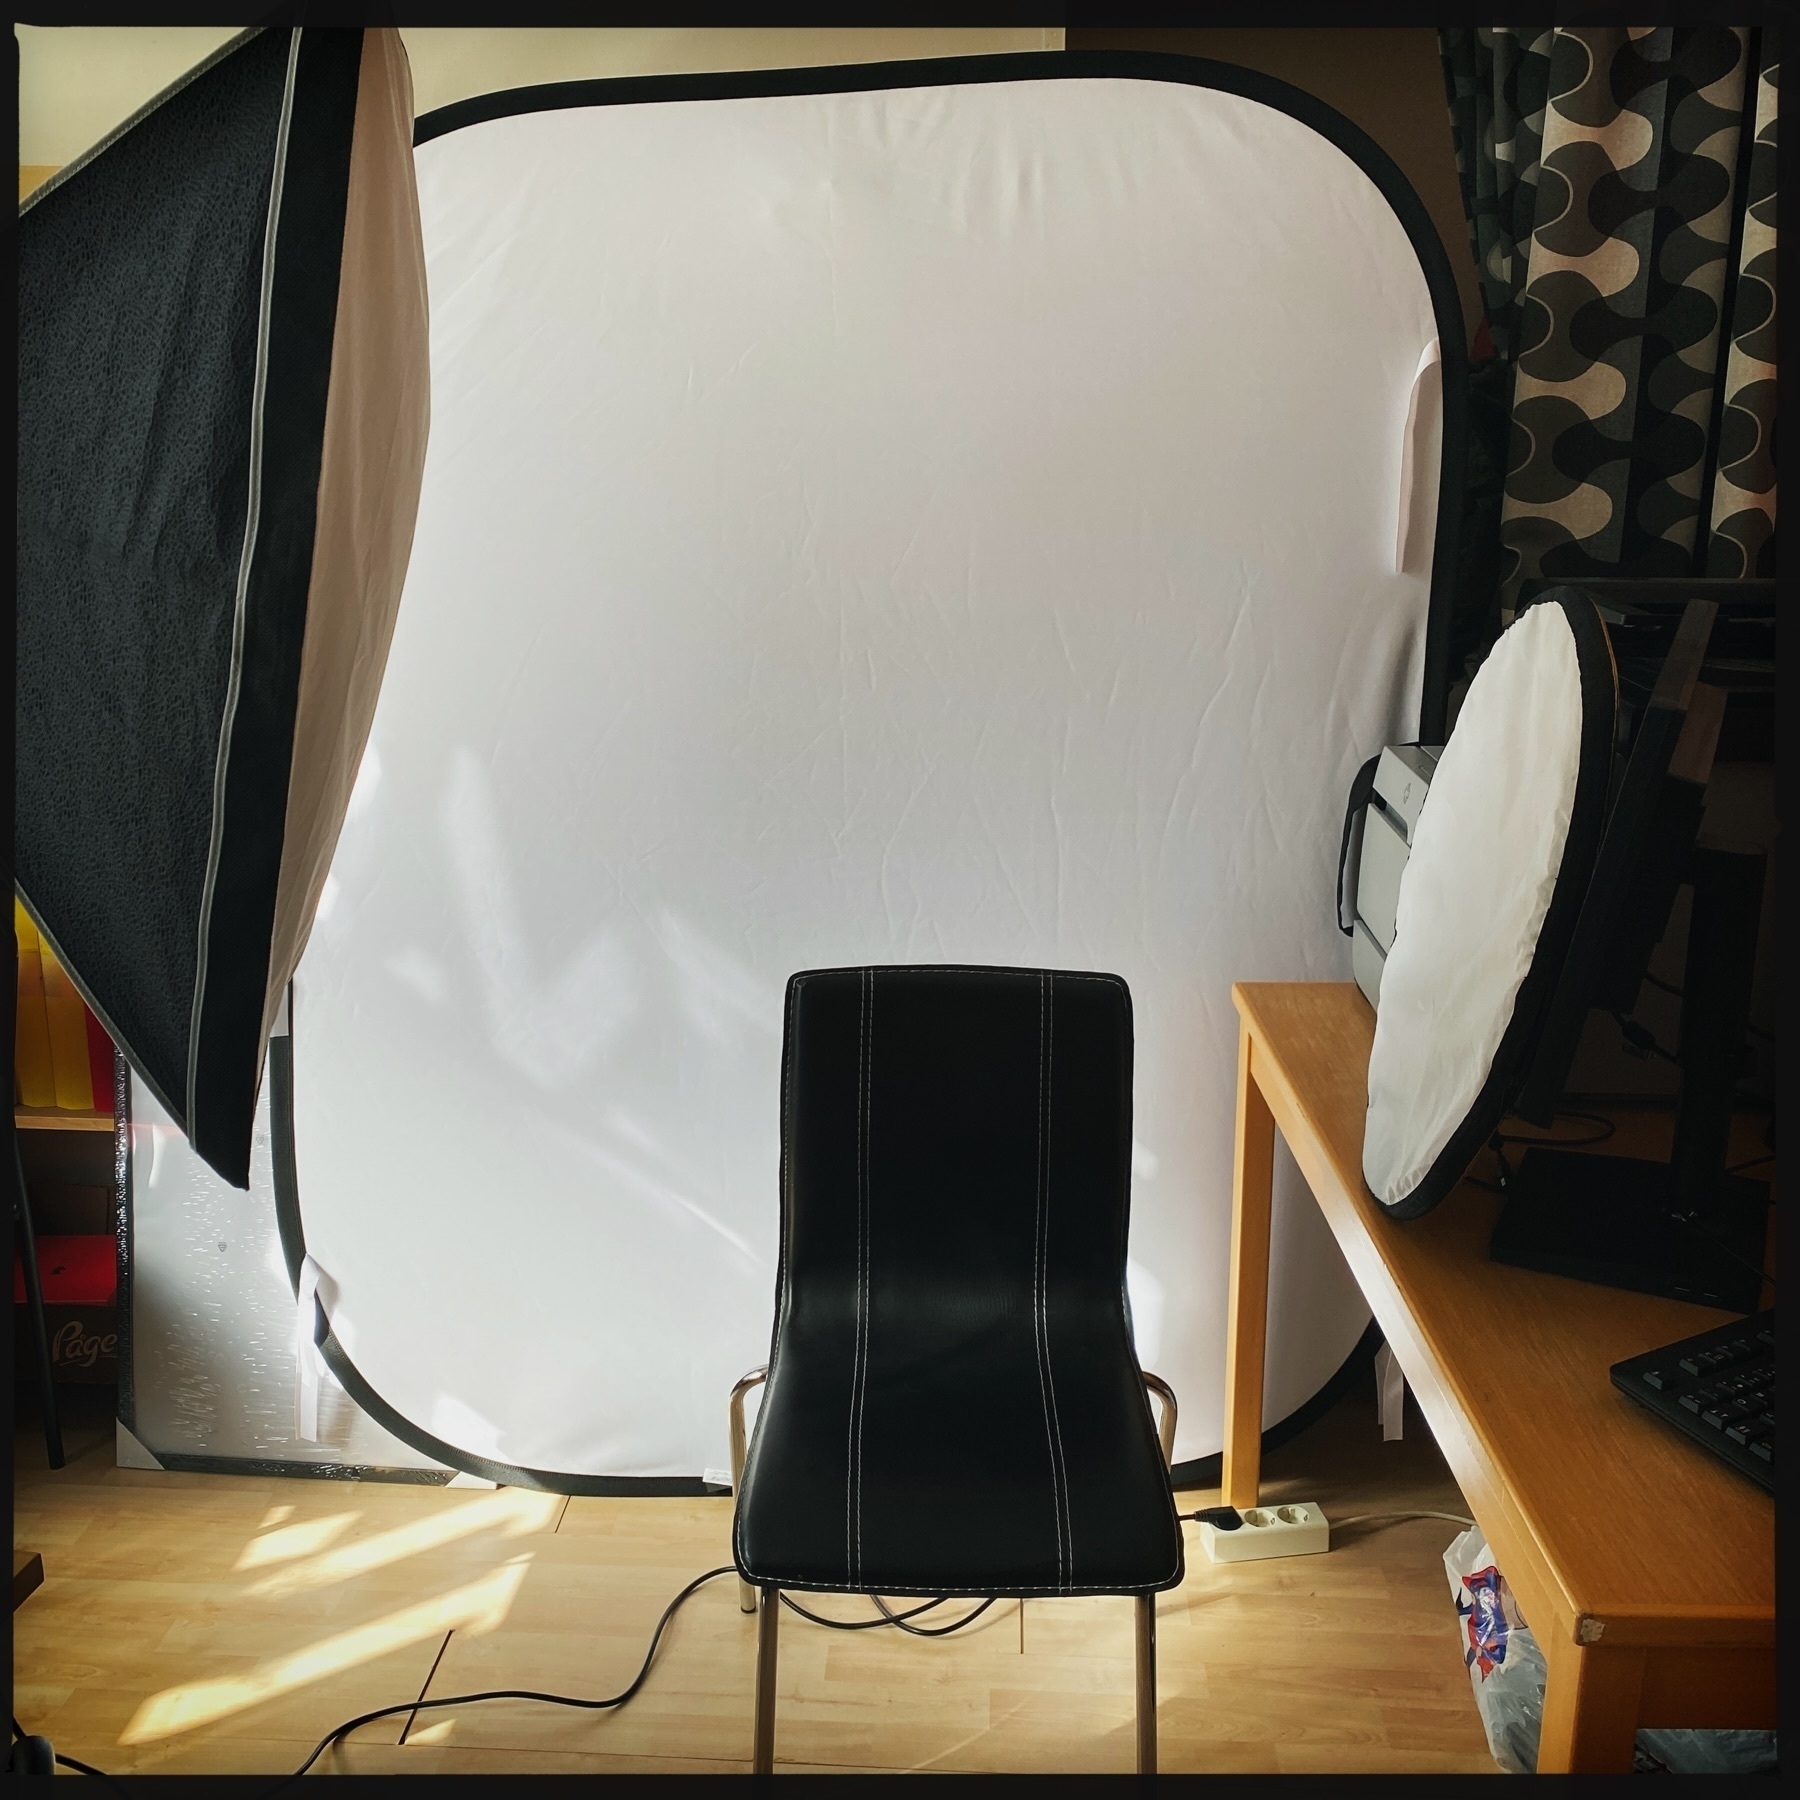 A minimalist home studio setup with a black chair centered in front of a large white backdrop. Surrounding the chair are a softbox light on the left, a desk on the right with a computer monitor and reflector, and some scattered cables on the wooden